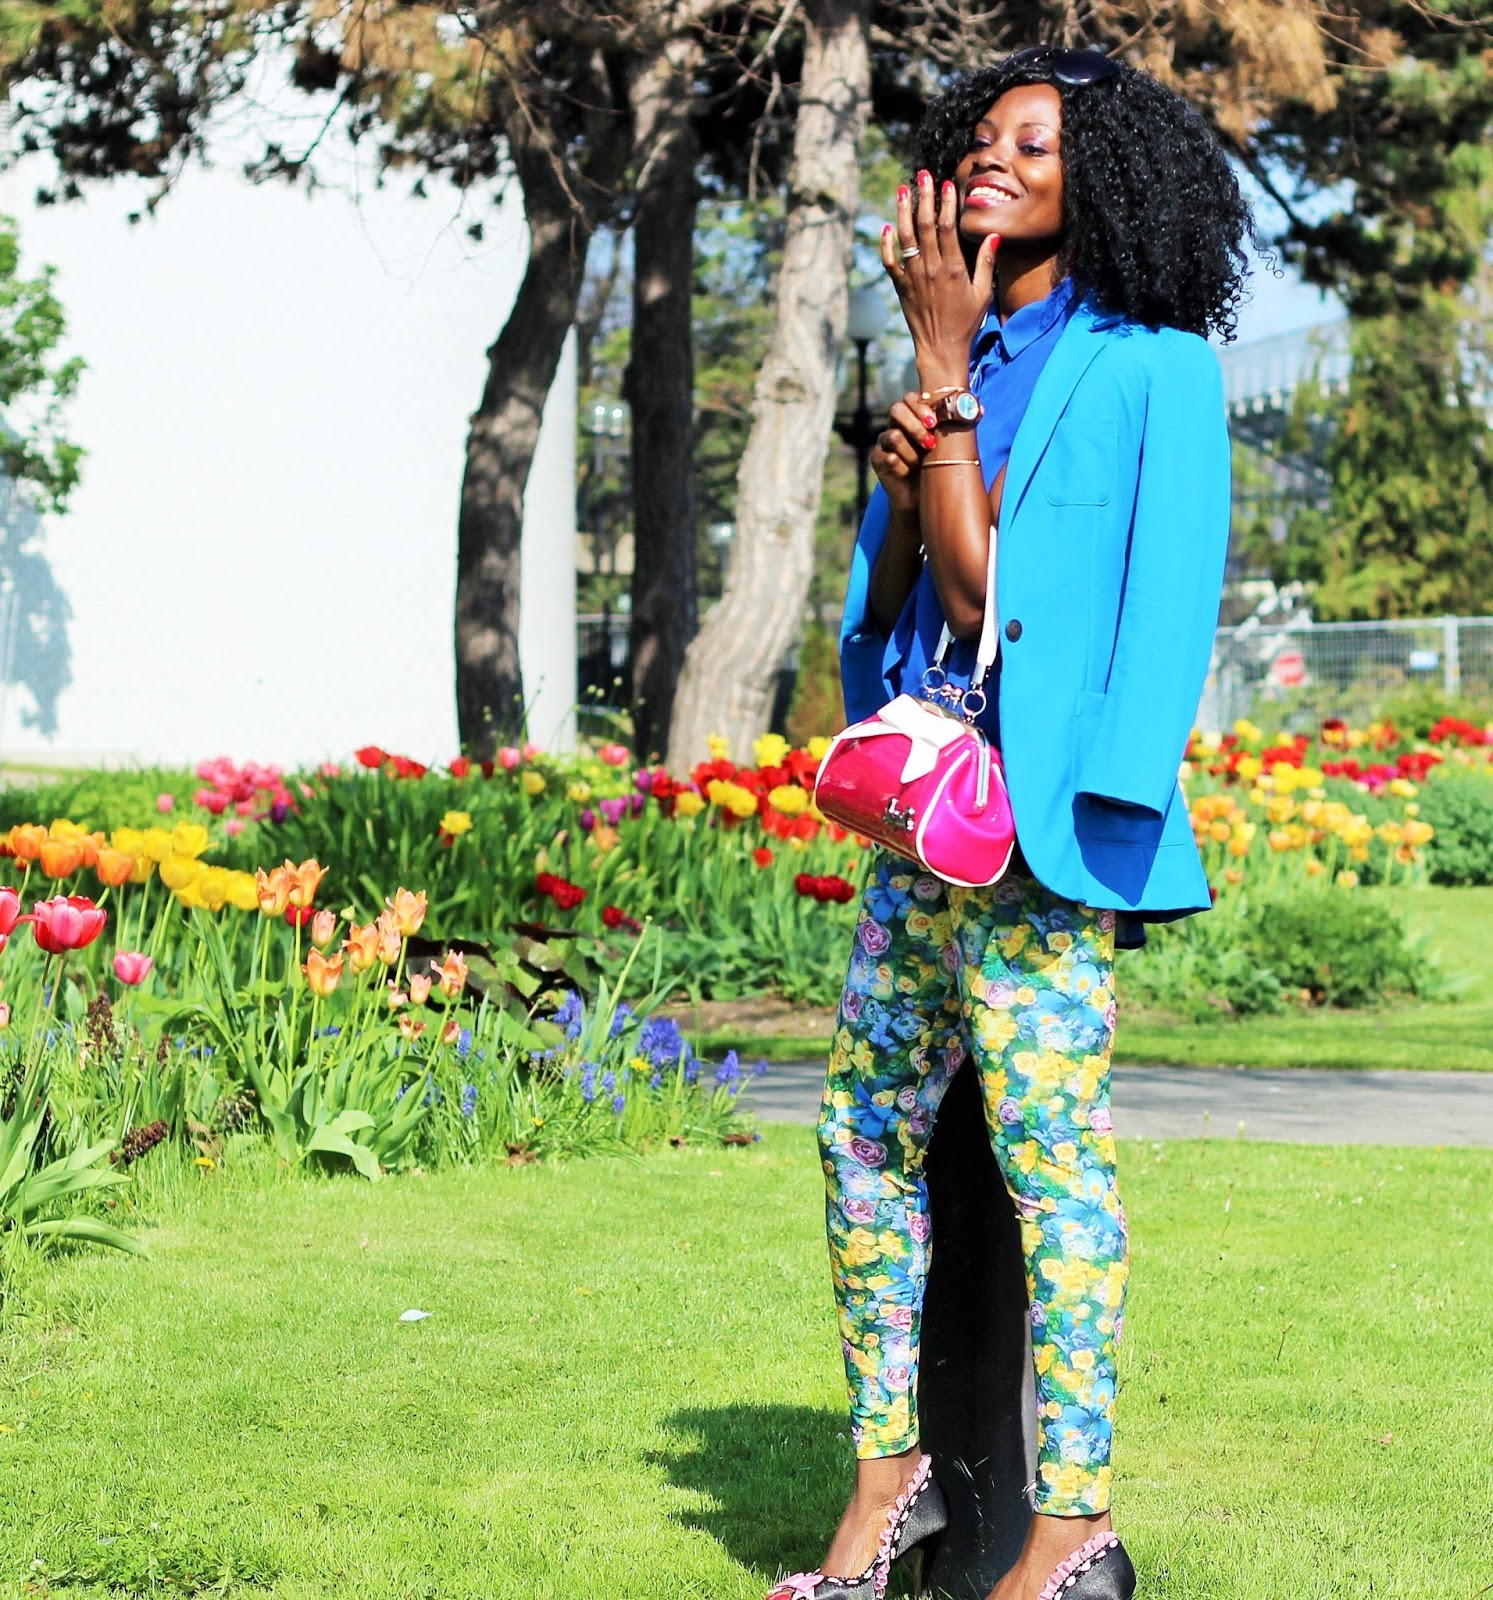 Blue Blazer styled with floral print pants by American Apparel